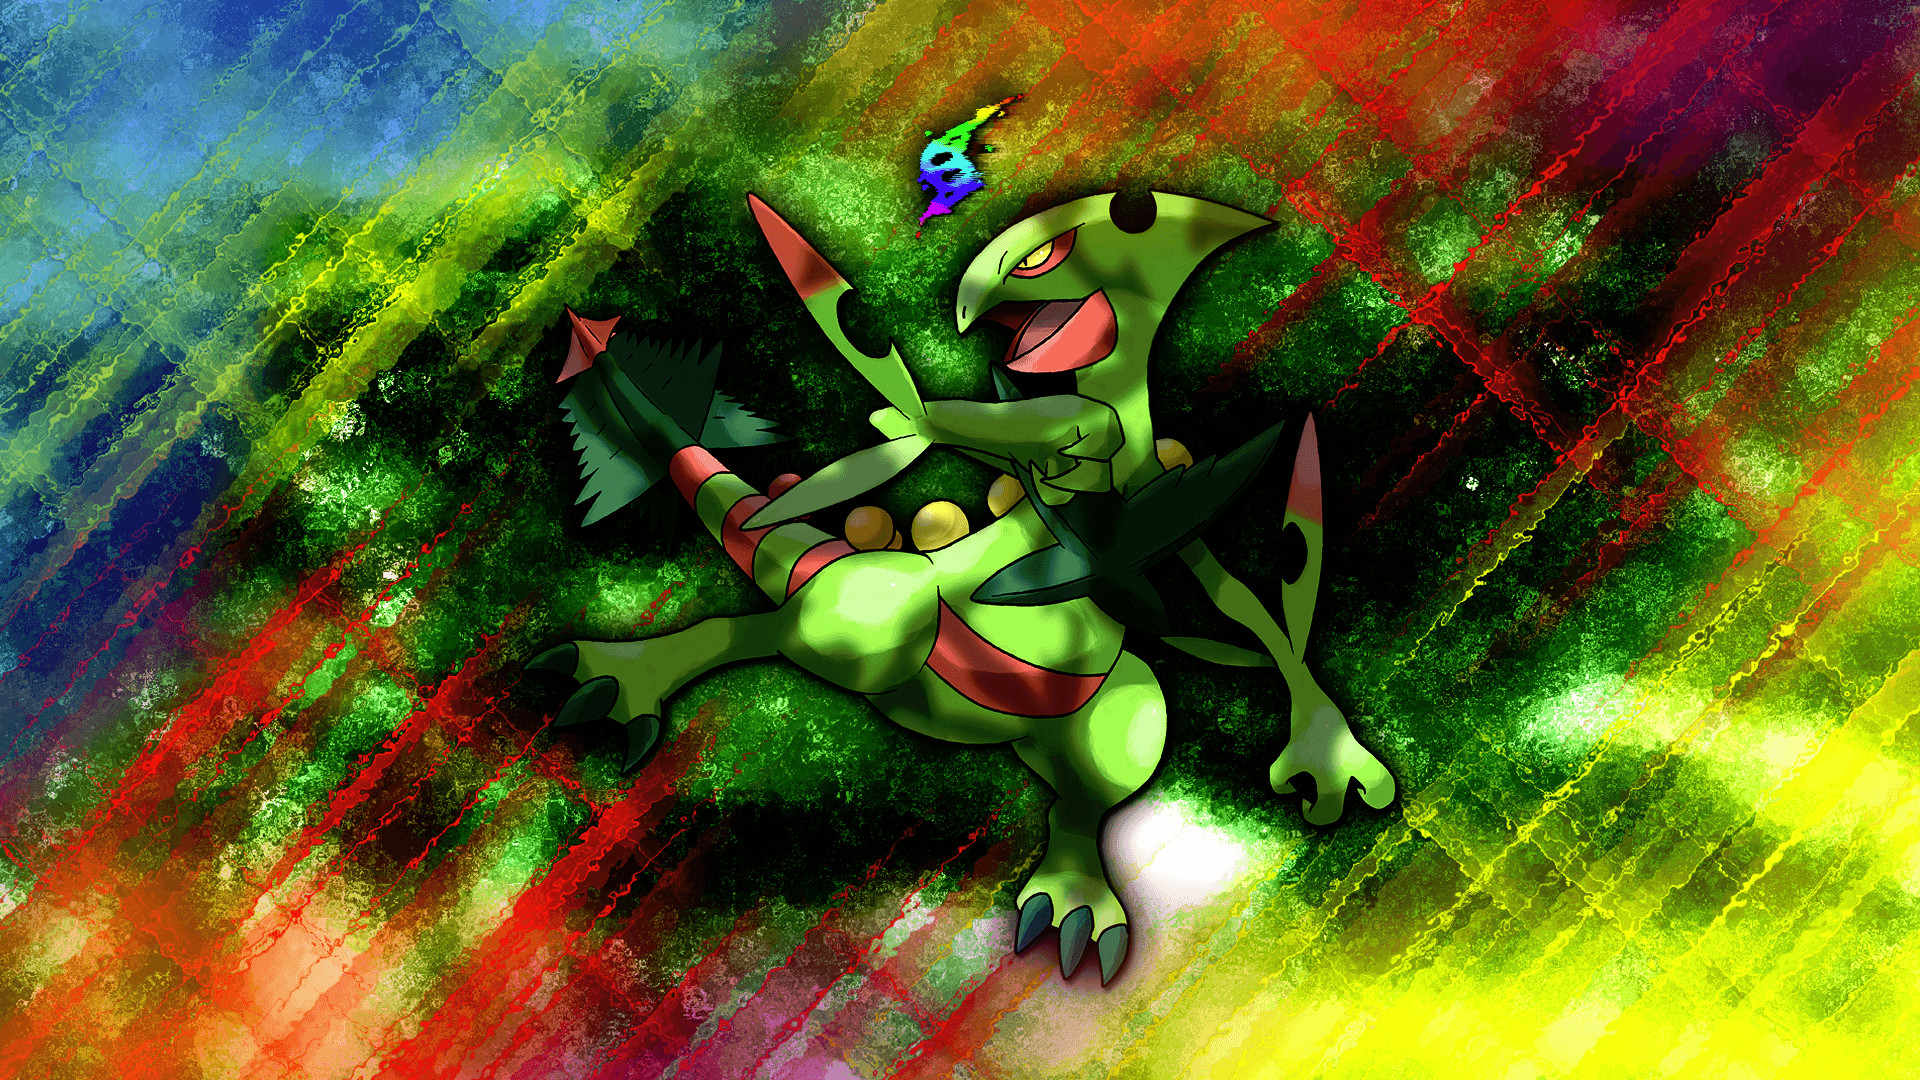 Download Sceptile Pokémon wallpapers for mobile phone free Sceptile  Pokémon HD pictures